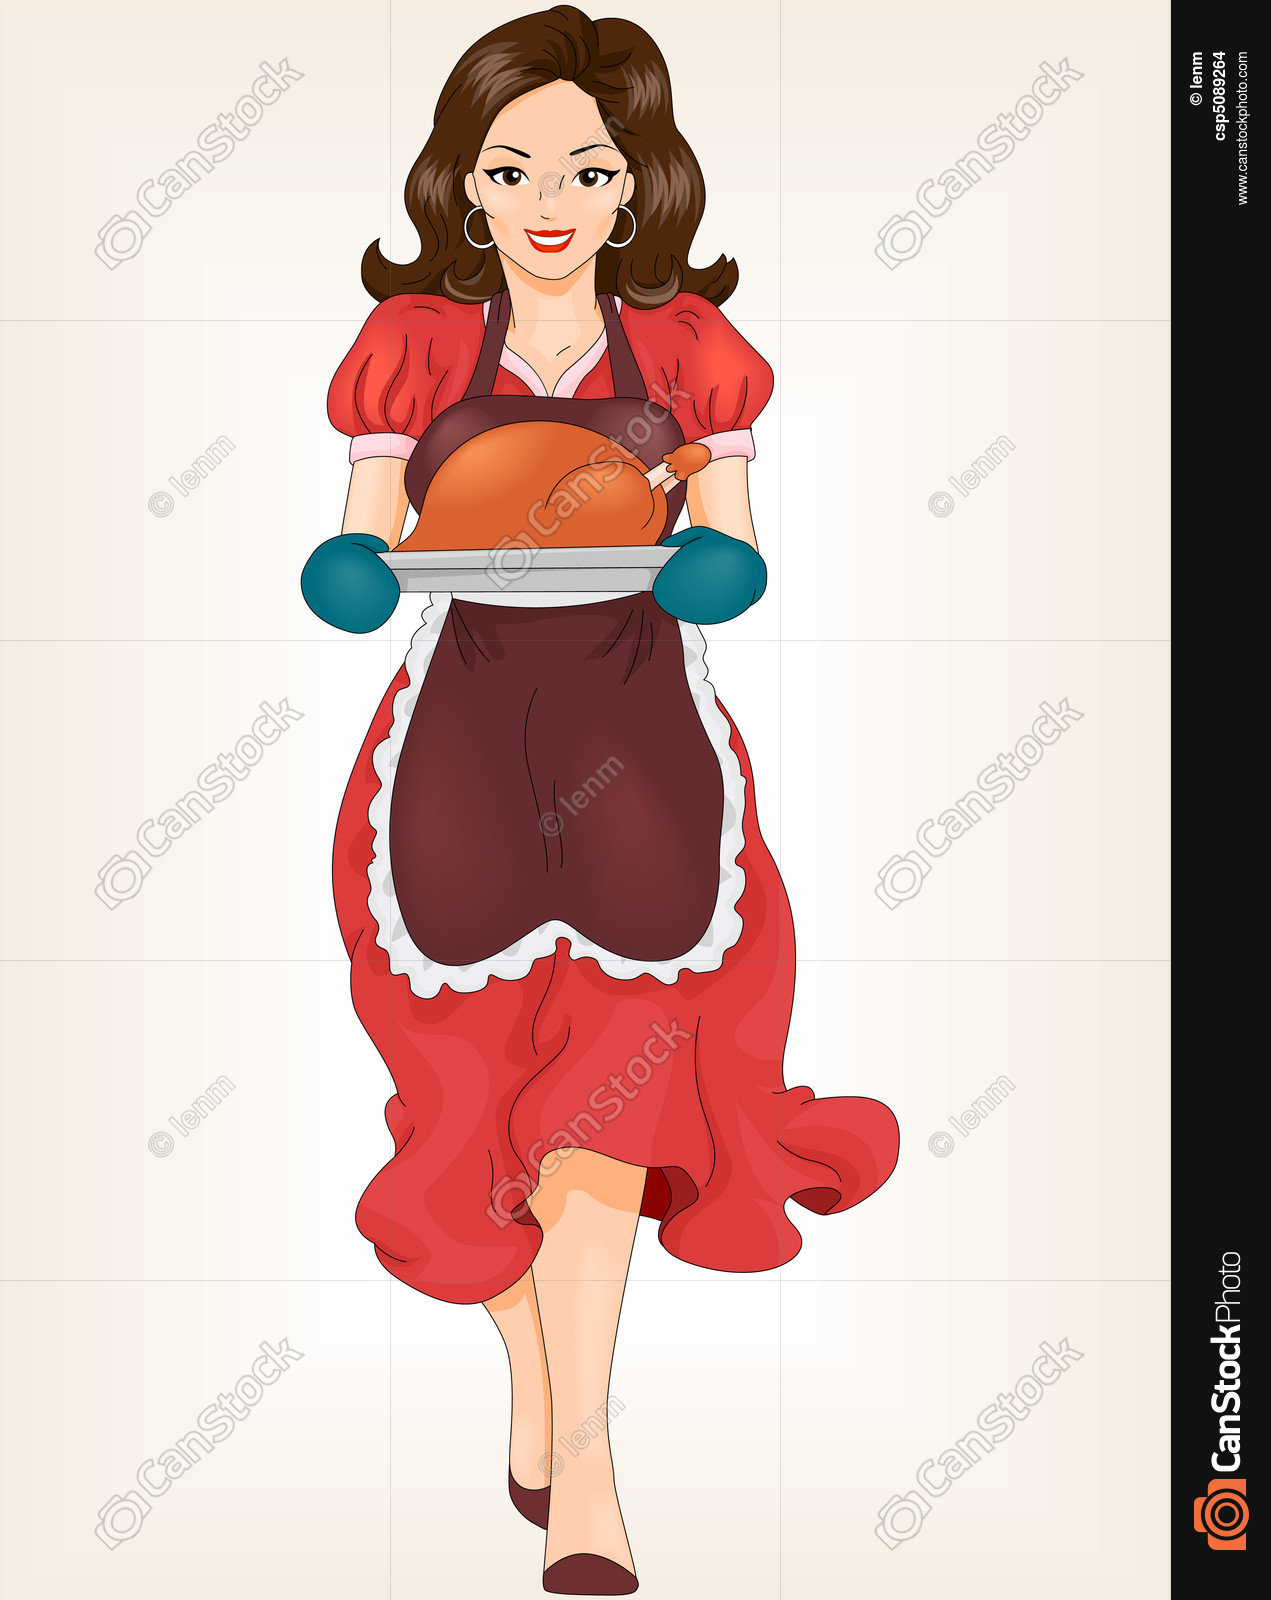 Pin up girl. Illustration of a curvy woman carrying a... drawing ...